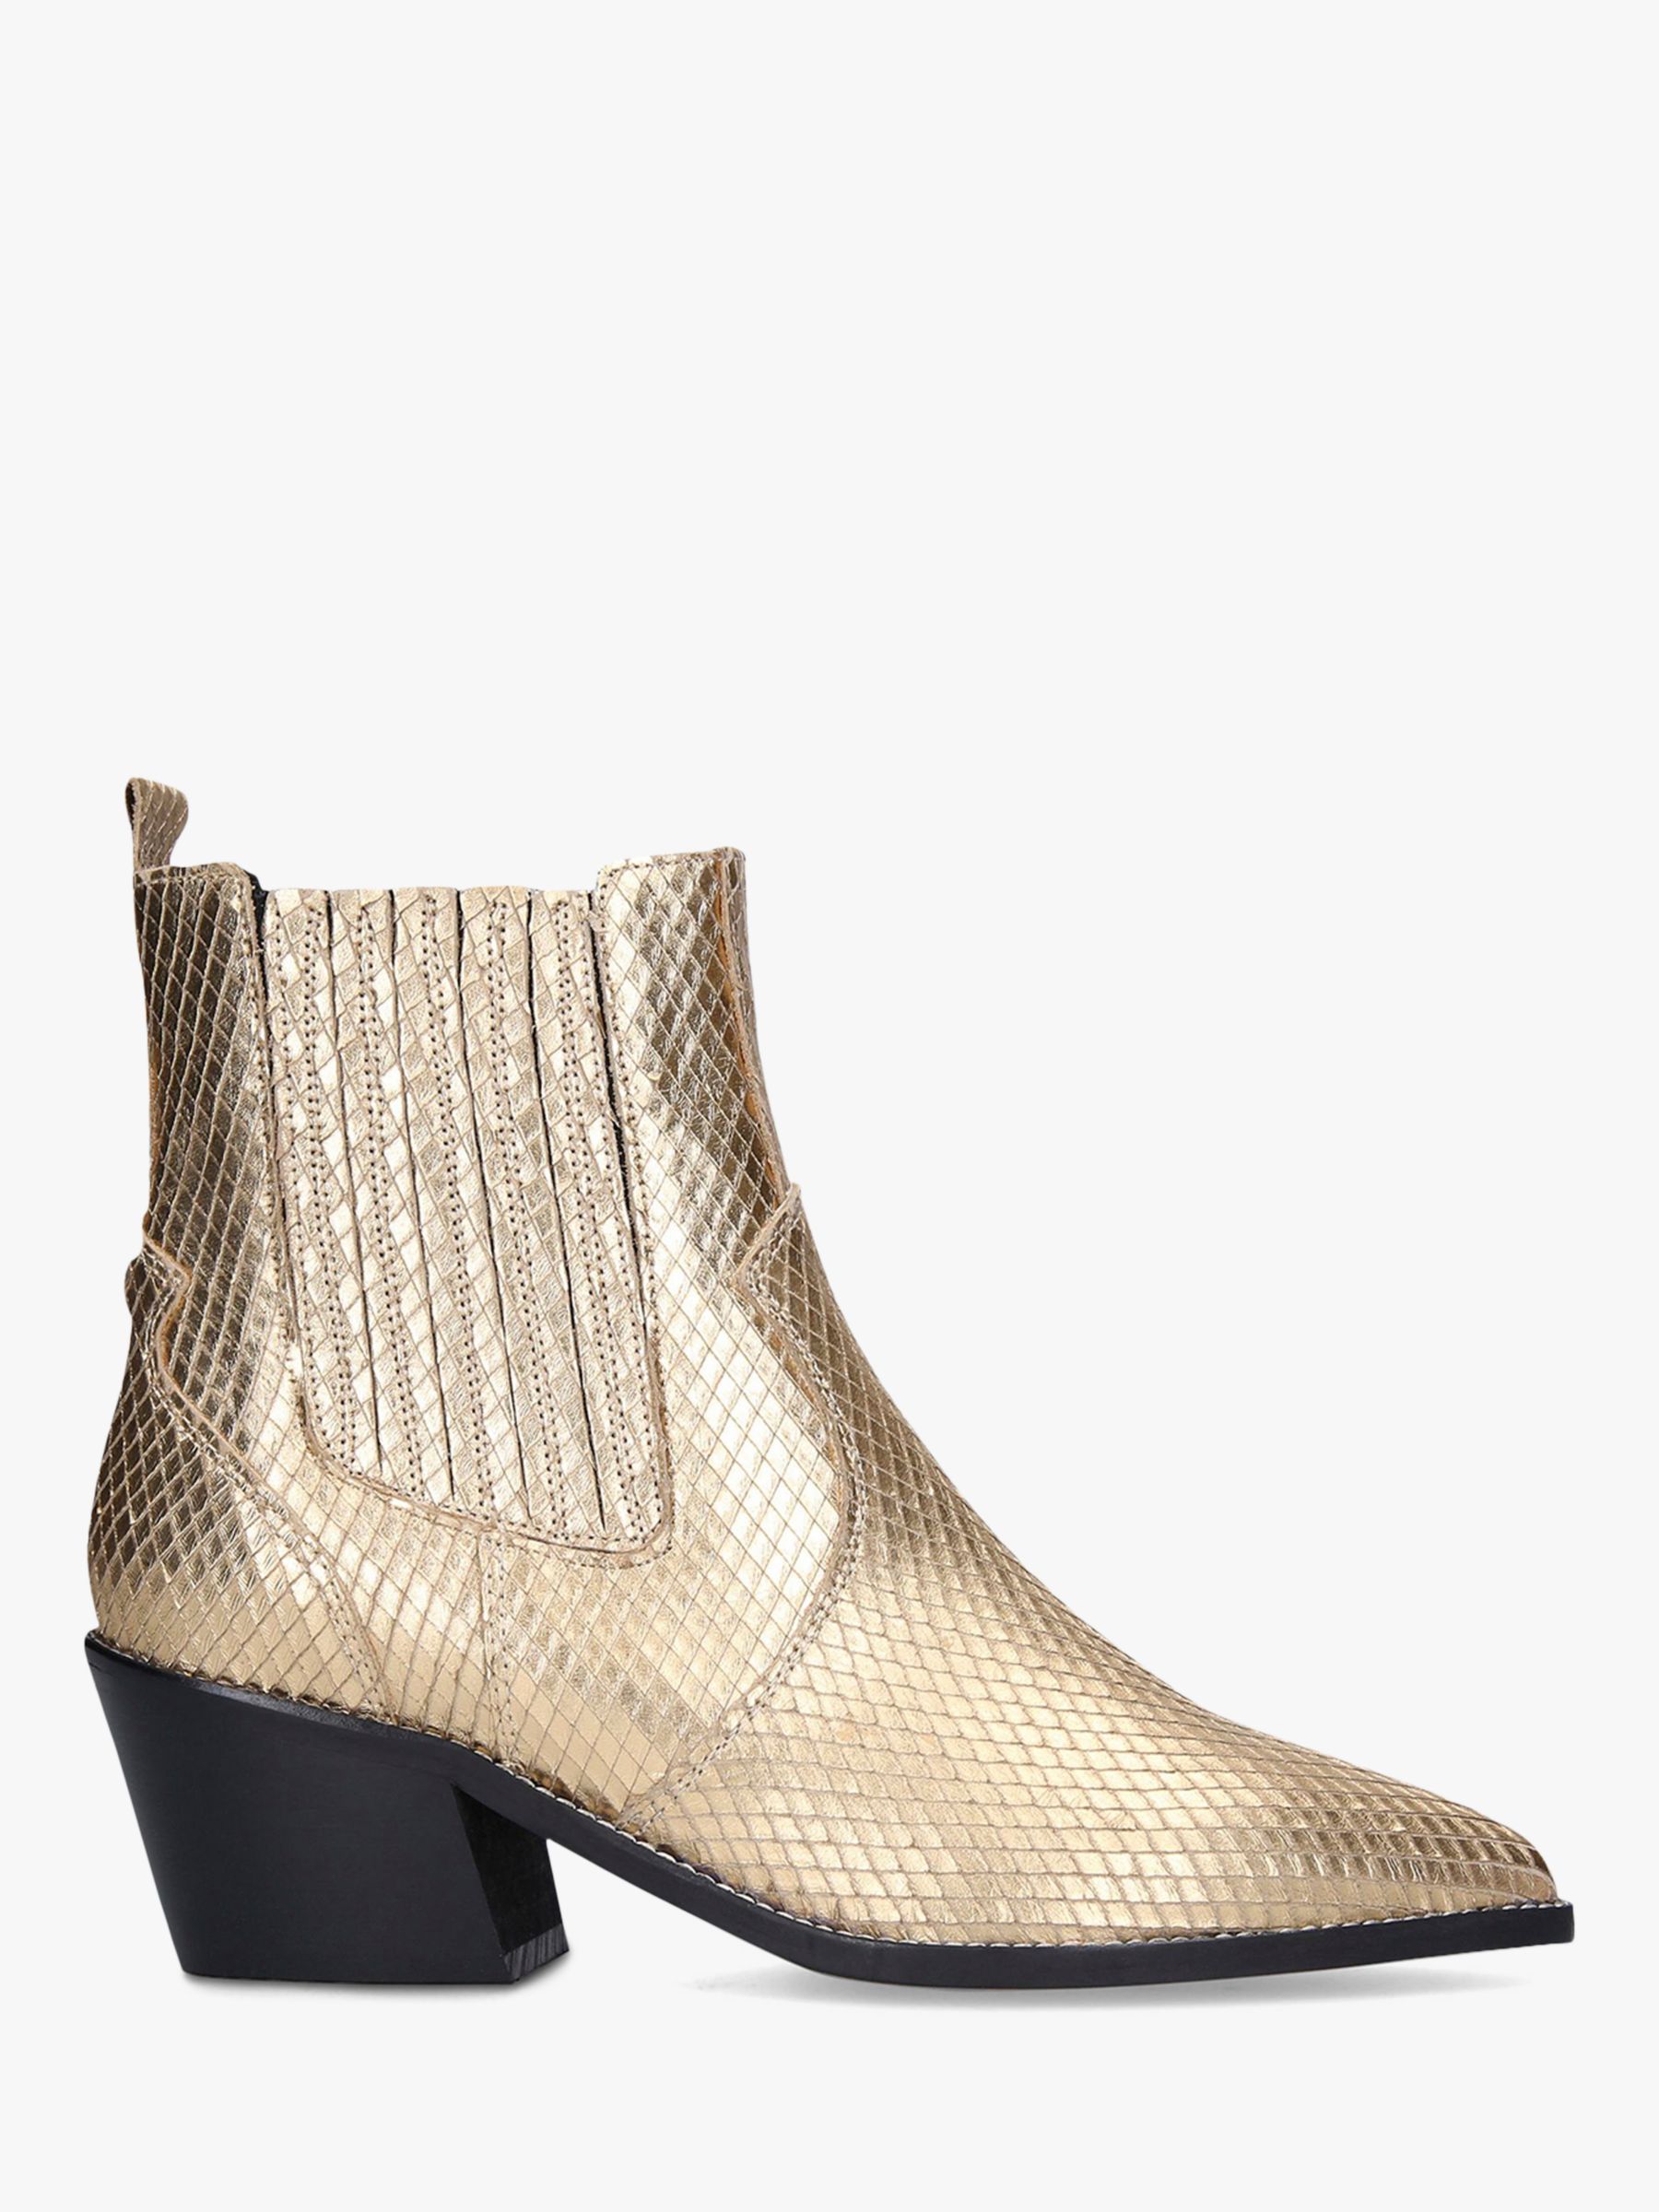 Carvela Stella Leather Western Style Ankle Boots, Gold at John Lewis ...